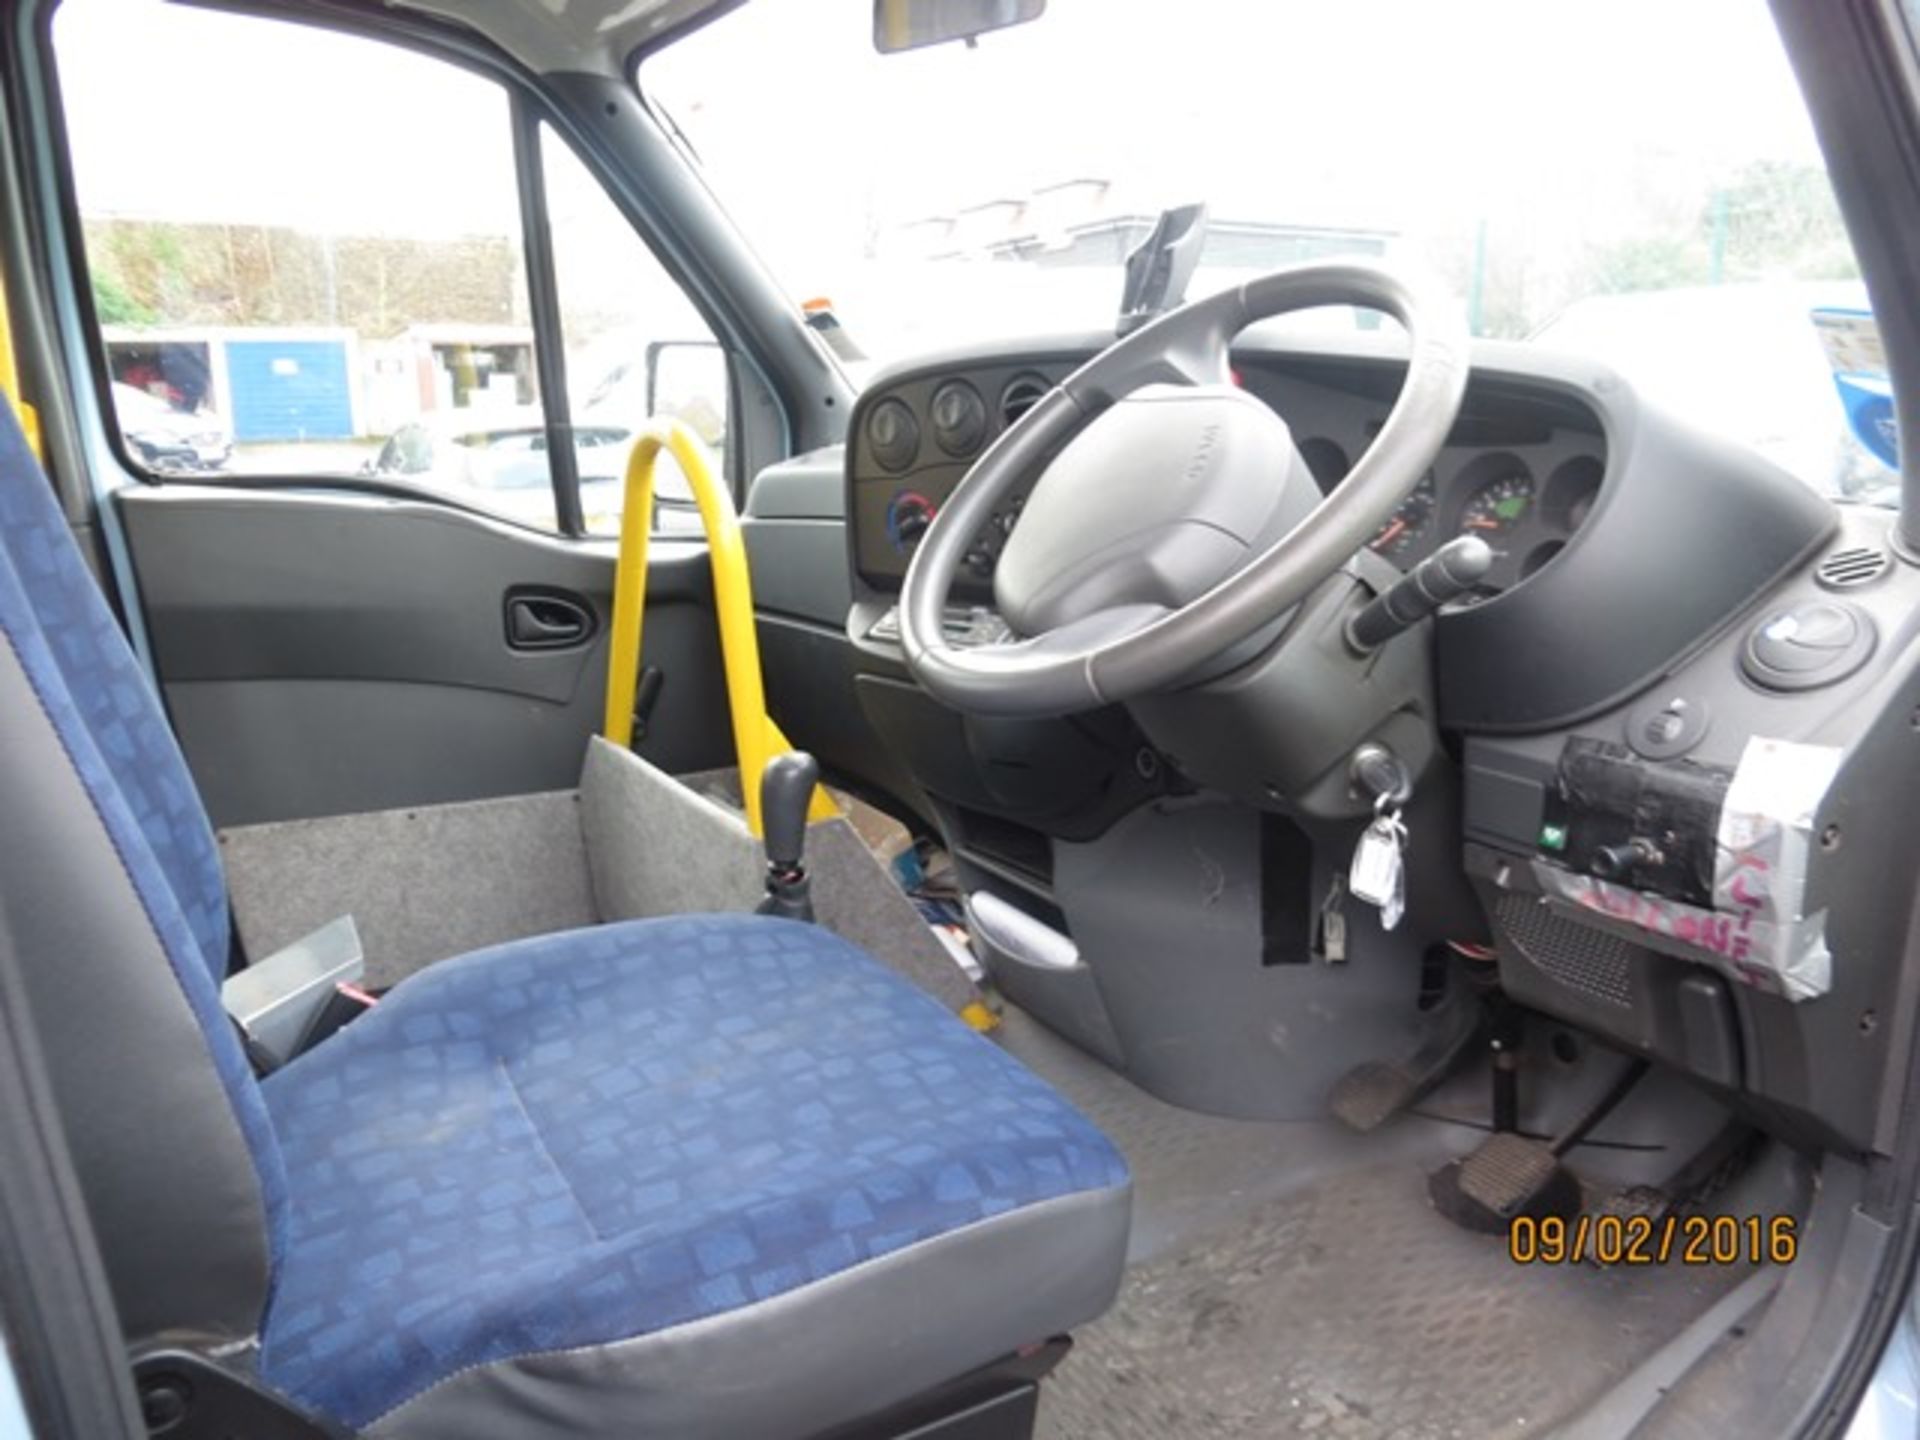 Iveco Daily 35C15 MWB  11 Seater Minibus c/w wheel chair lift & access D.O.R. 2/05 GN54 JXC - Image 5 of 7